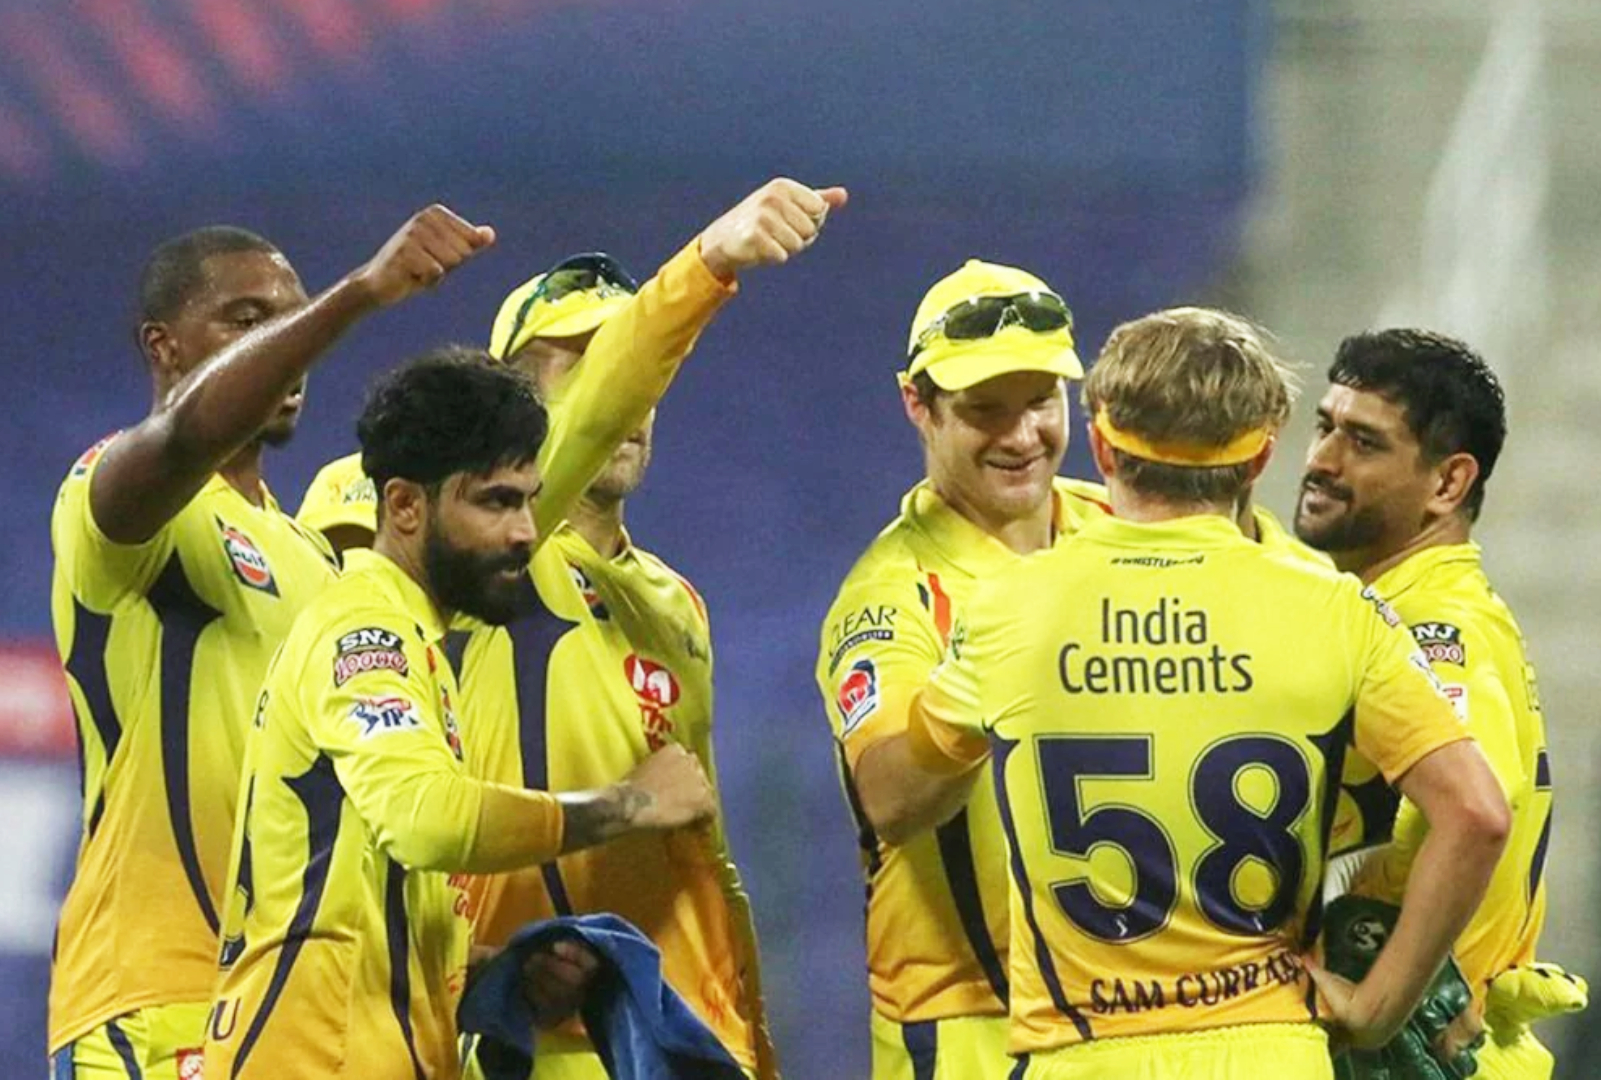 Sakshi Dhoni Shares Emotional Post As CSK Miss Out On IPL Playoff Spot